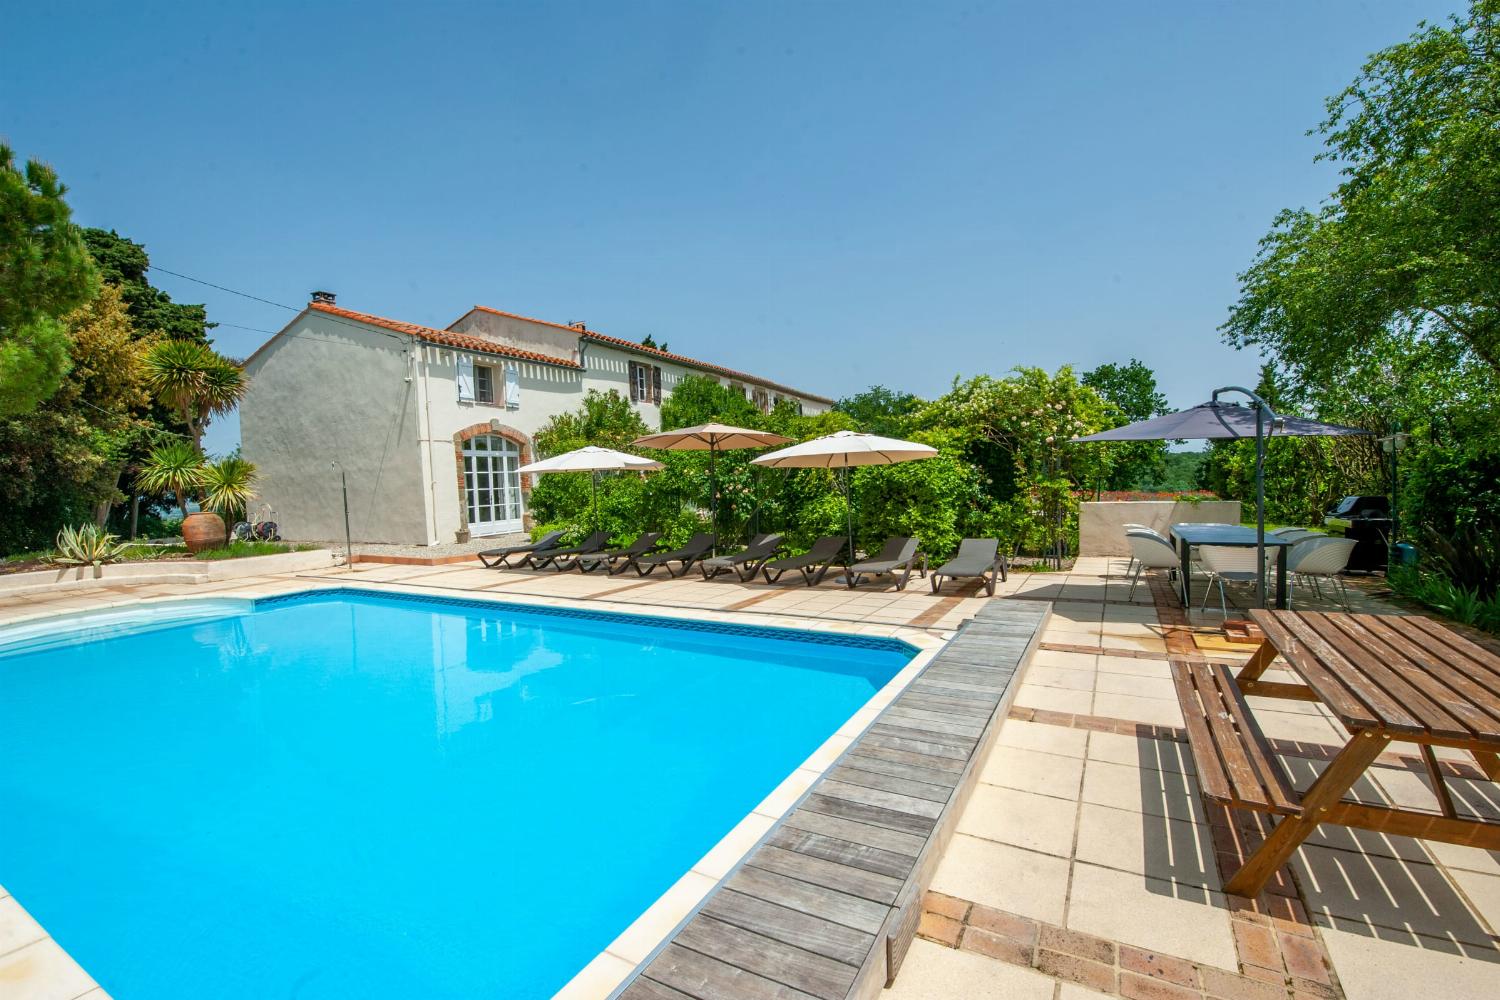 Holiday villa in the South of France with private heated pool